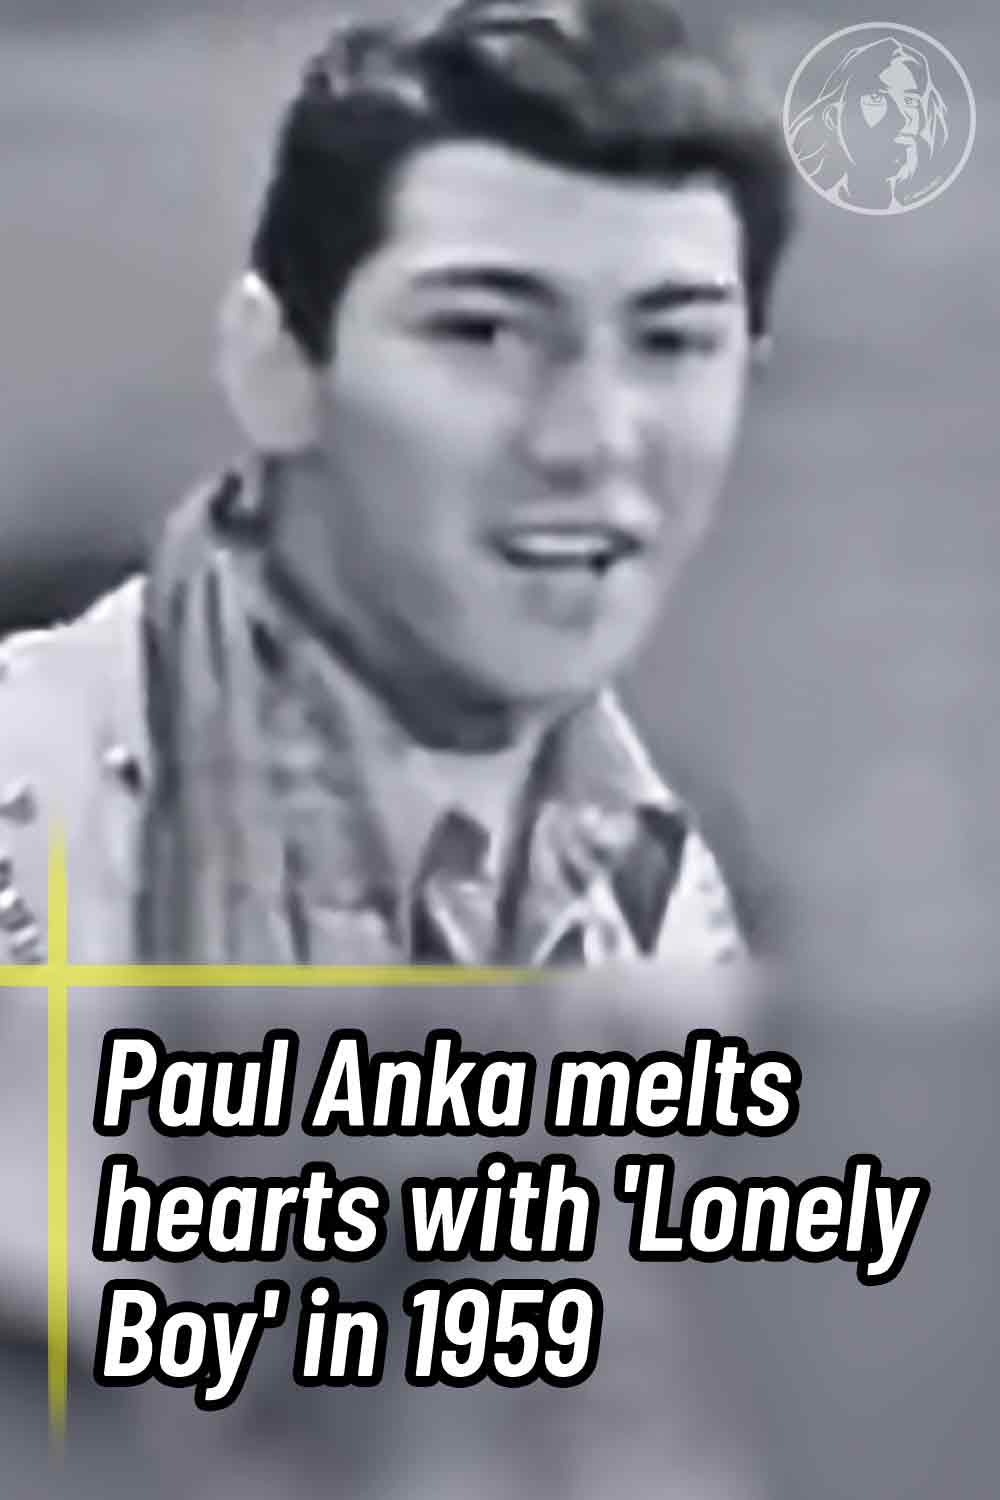 Paul Anka melts hearts with \'Lonely Boy\' in 1959